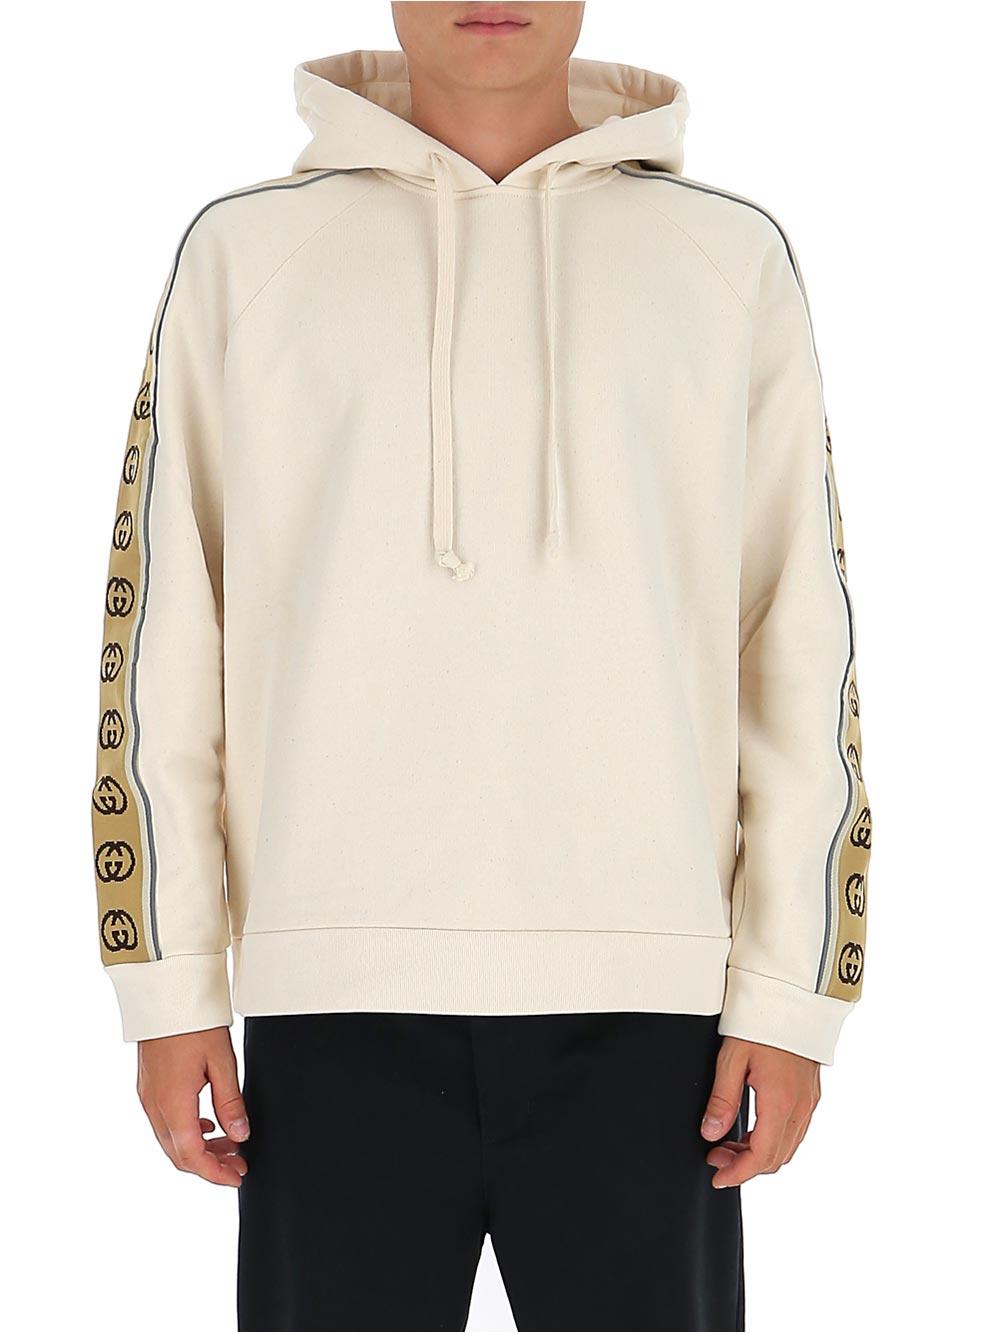 Gucci Hooded Sweatshirt With GG Piping in White for Men | Lyst